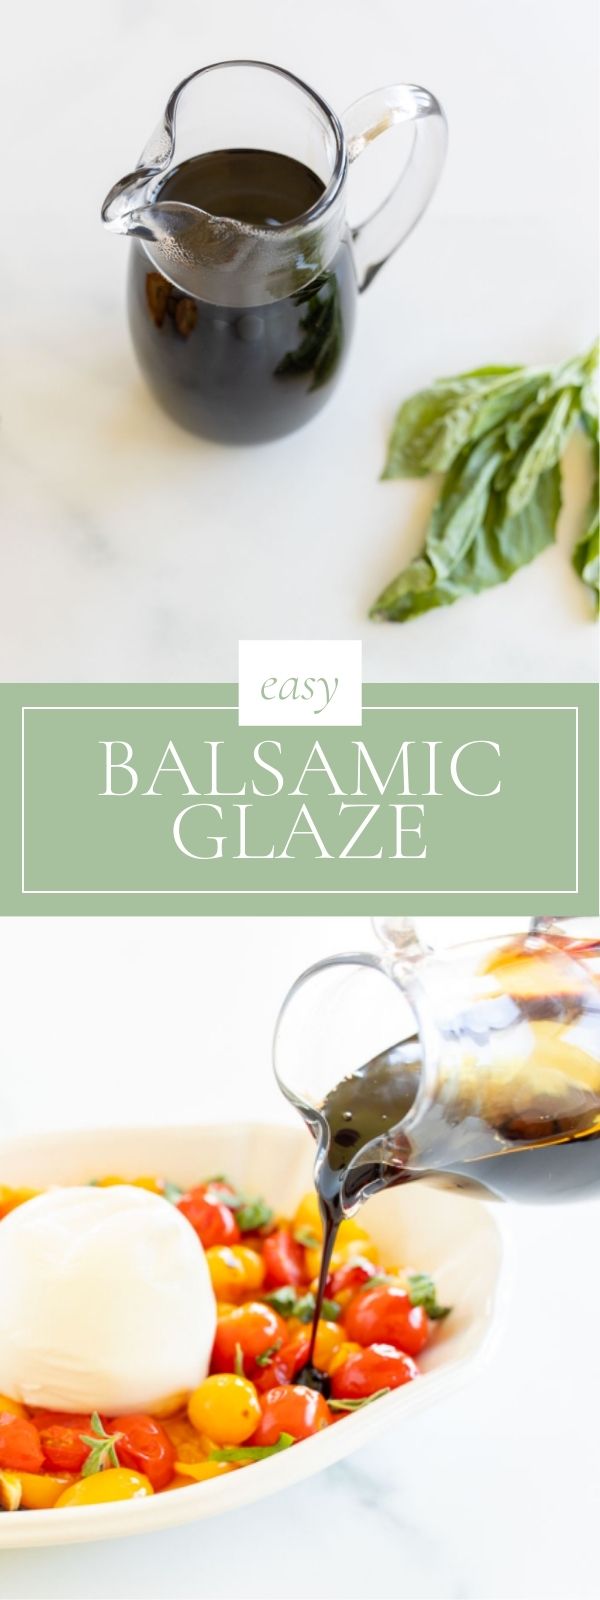 On a marble counter top, there is a glass pitcher of Balsamic Glaze and of it pouring onto a baking dish of tomatoes, basil, and mozzarella.